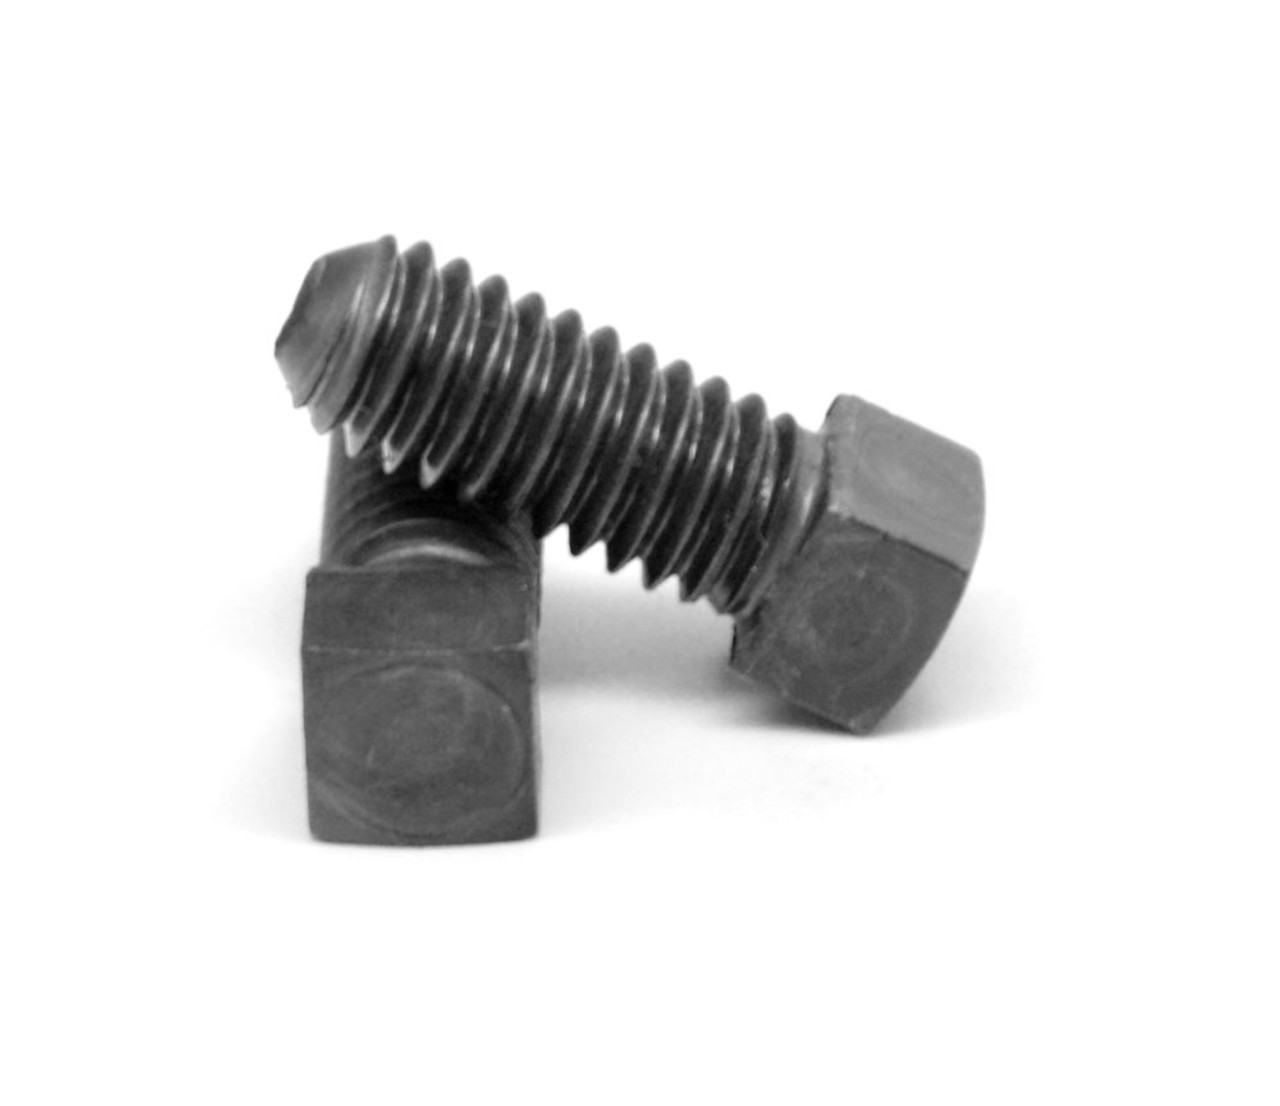 7/8"-9 x 2 1/2" (FT) Coarse Thread Square Head Set Screw Cup Point Low Carbon Steel Case Hardened Plain Finish